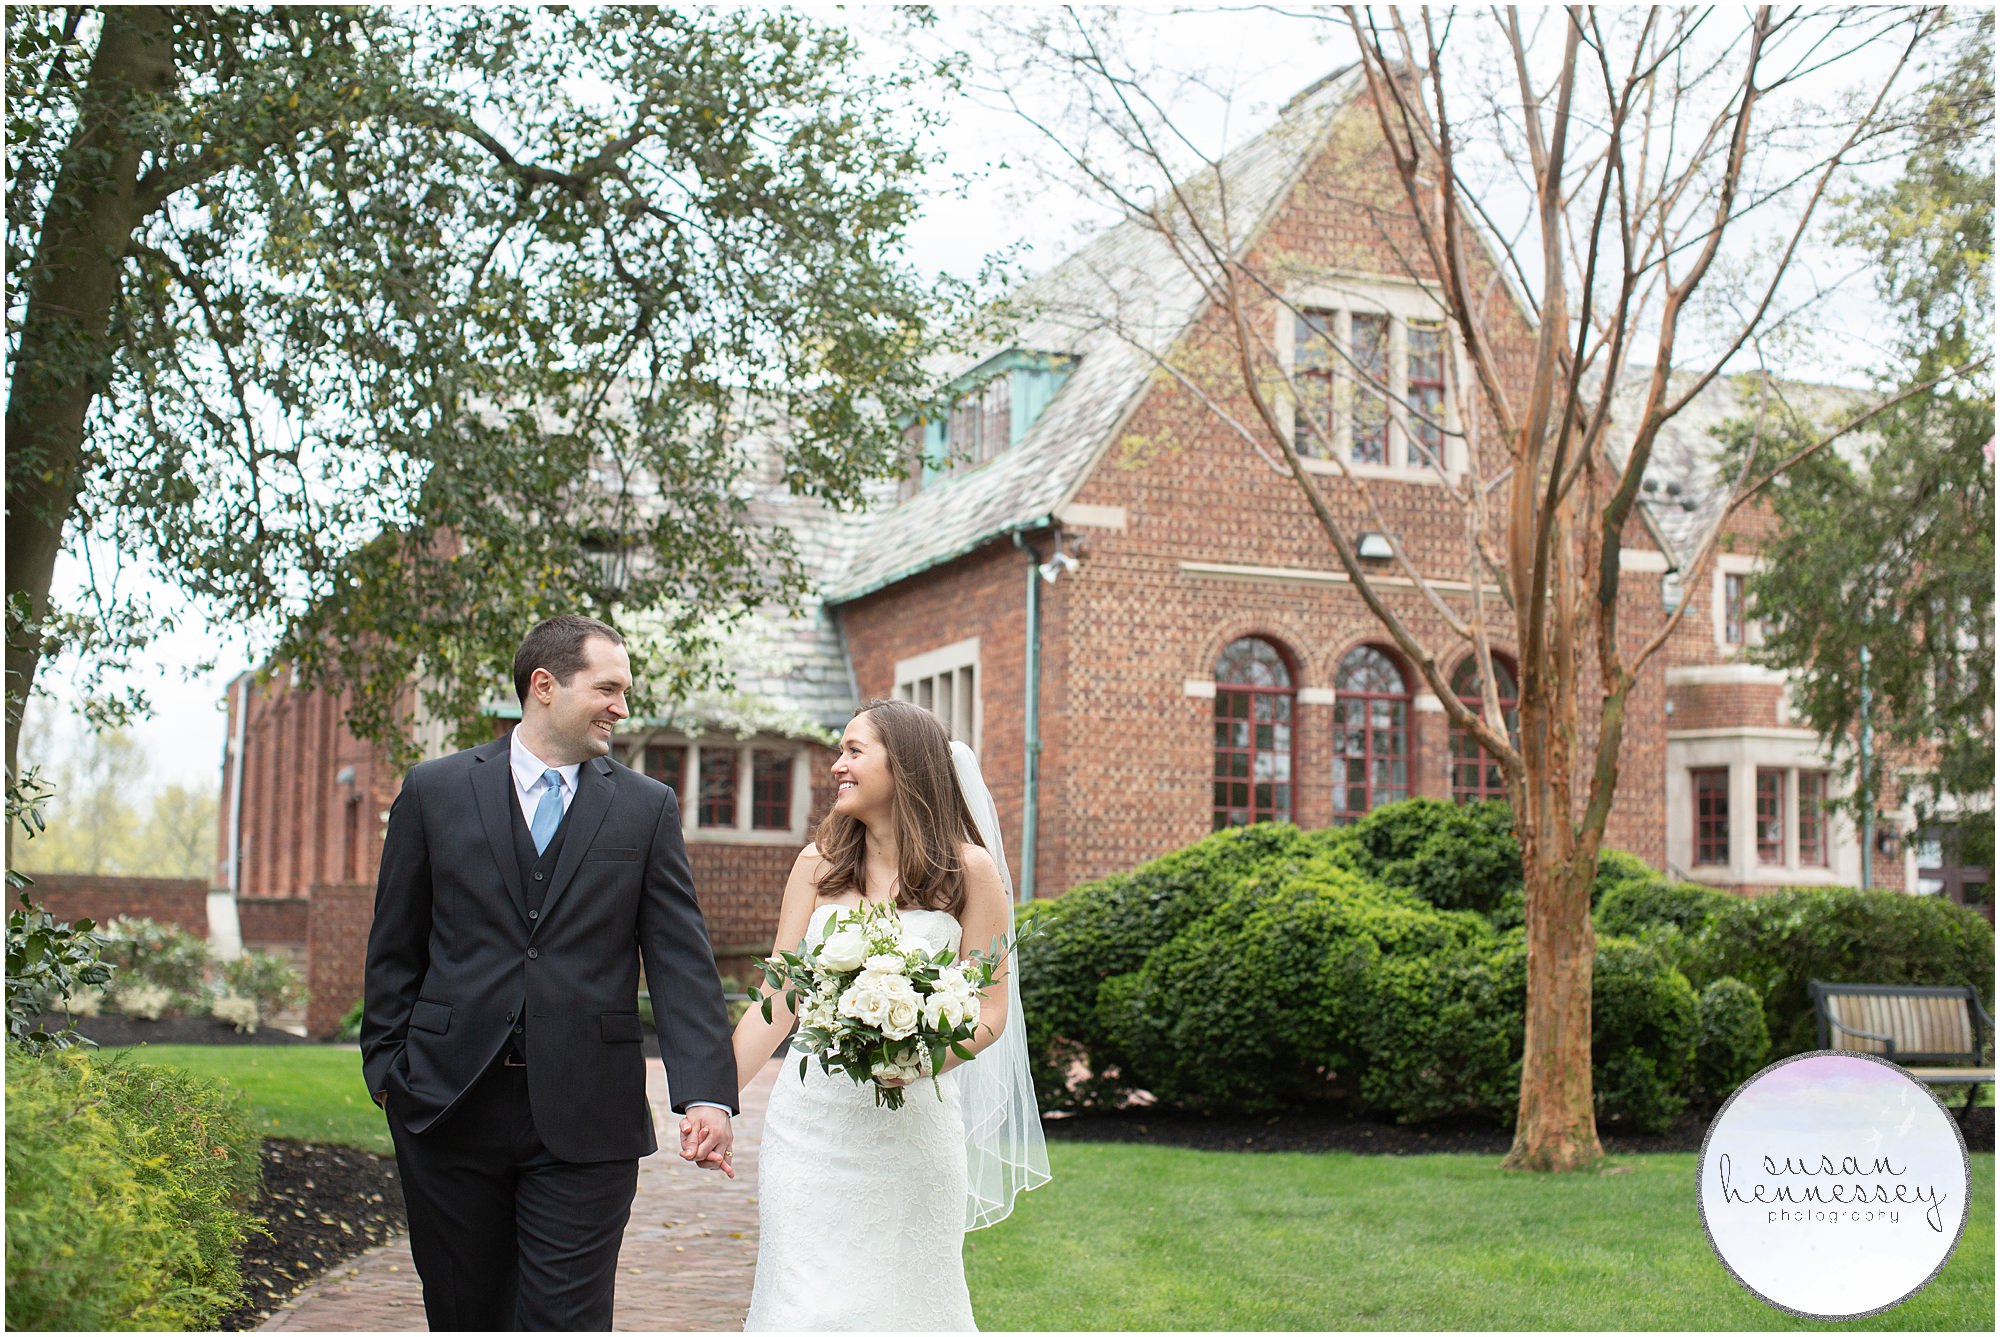 Bride & Groom Portraits at the Community House of Moorestown at NJ Micro Wedding